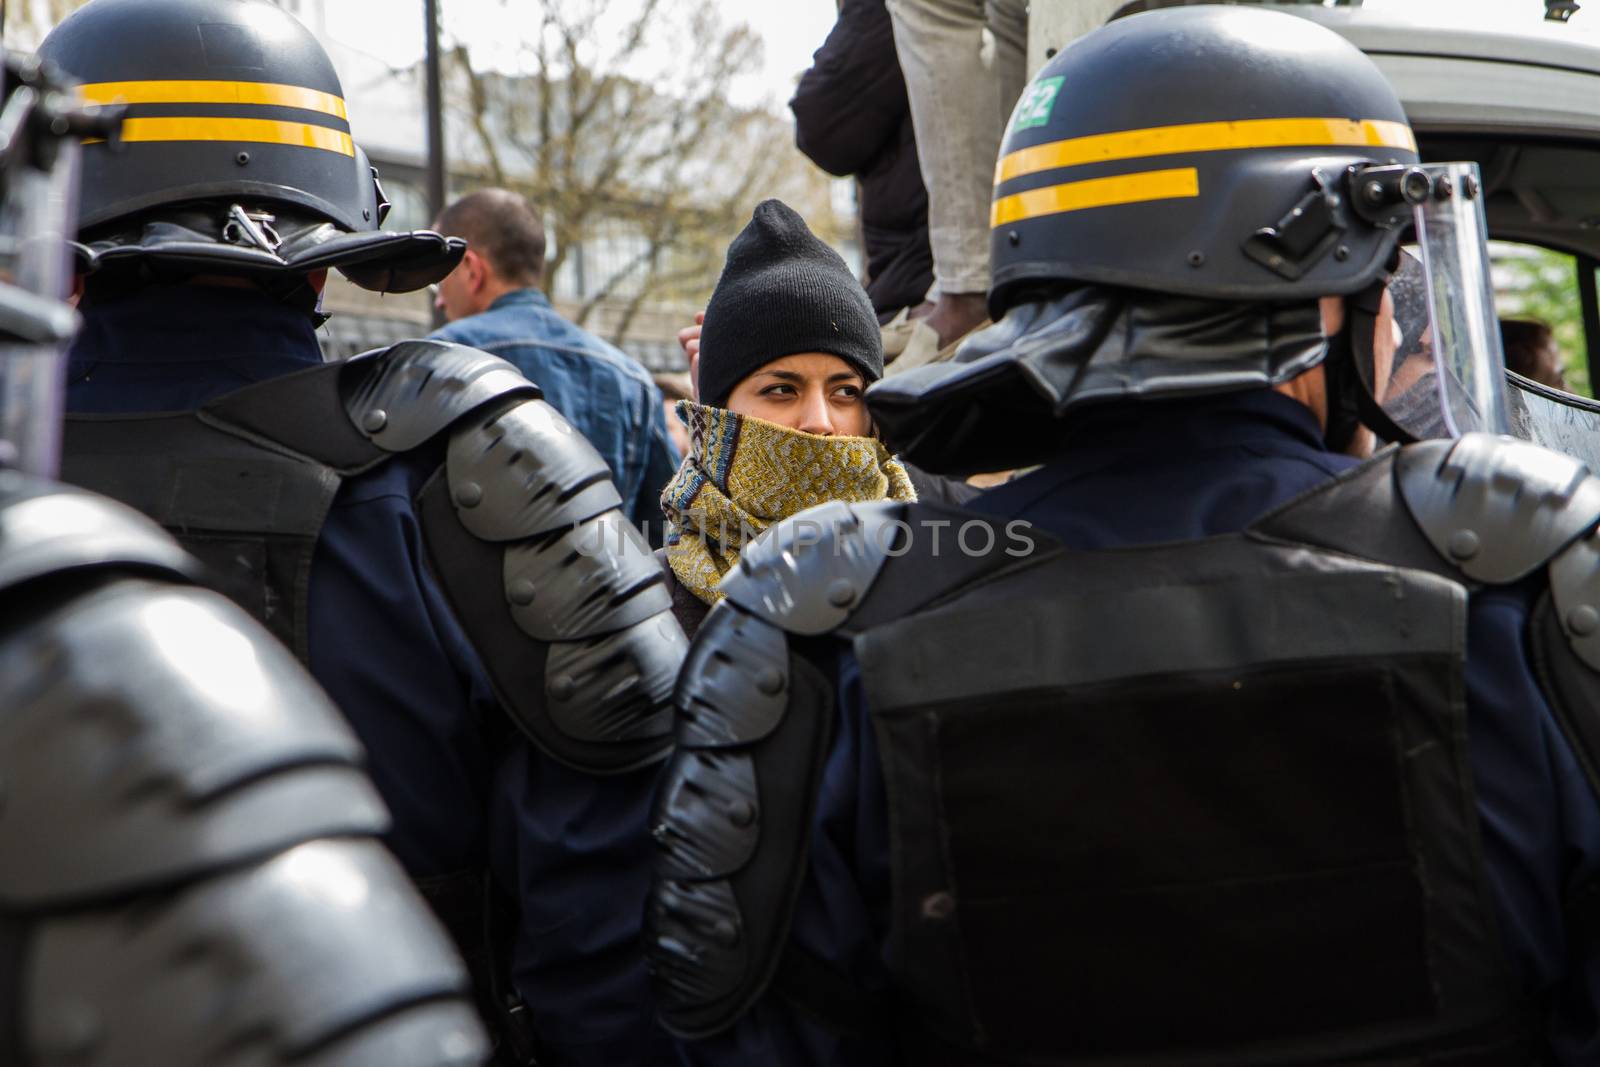 FRANCE, Paris: A woman faces riot policemen as hundreds demonstrate against the French government's proposed labour law reforms on April 14, 2016 in Paris. Fresh strikes by unions and students are being held across France against proposed reforms to France's labour laws, heaping pressure on President Francois Hollande who suffered a major defeat over constitutional reforms on March 30.